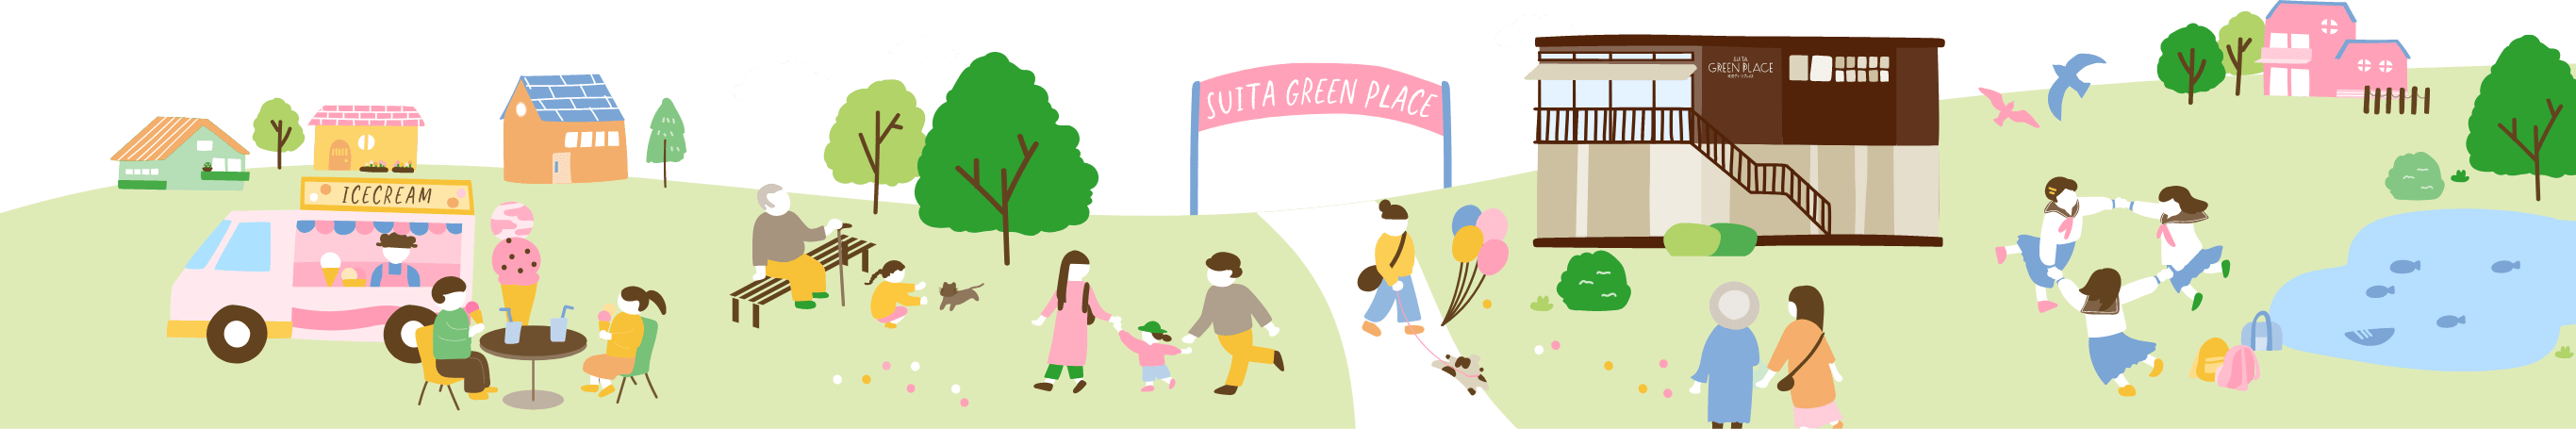 suita green place